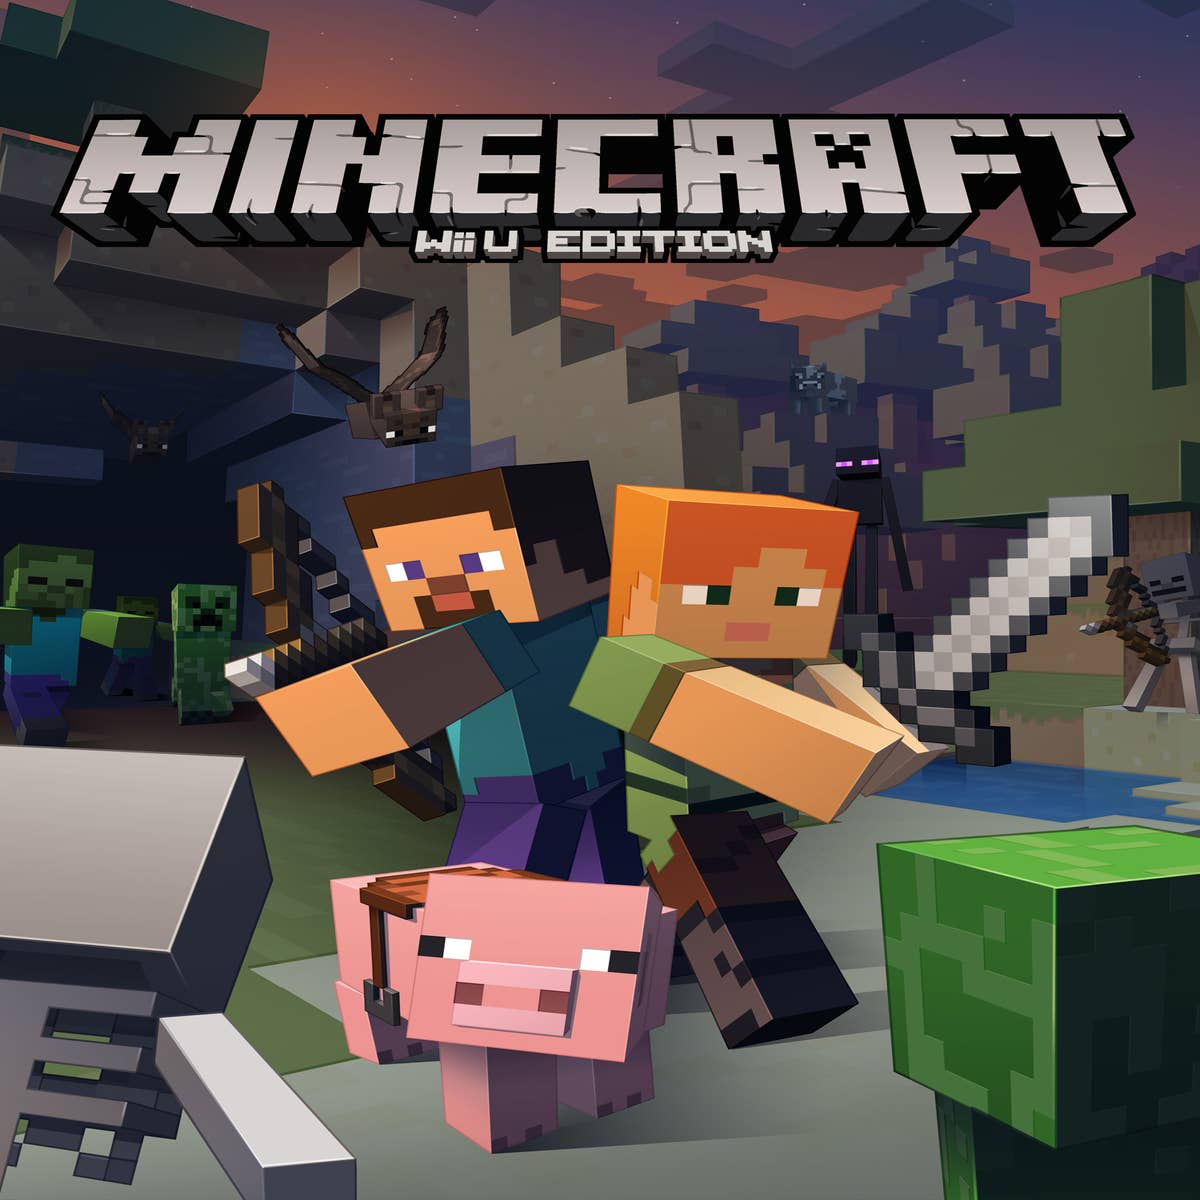 Minecraft console editions get free Pilotwings-style mini-game